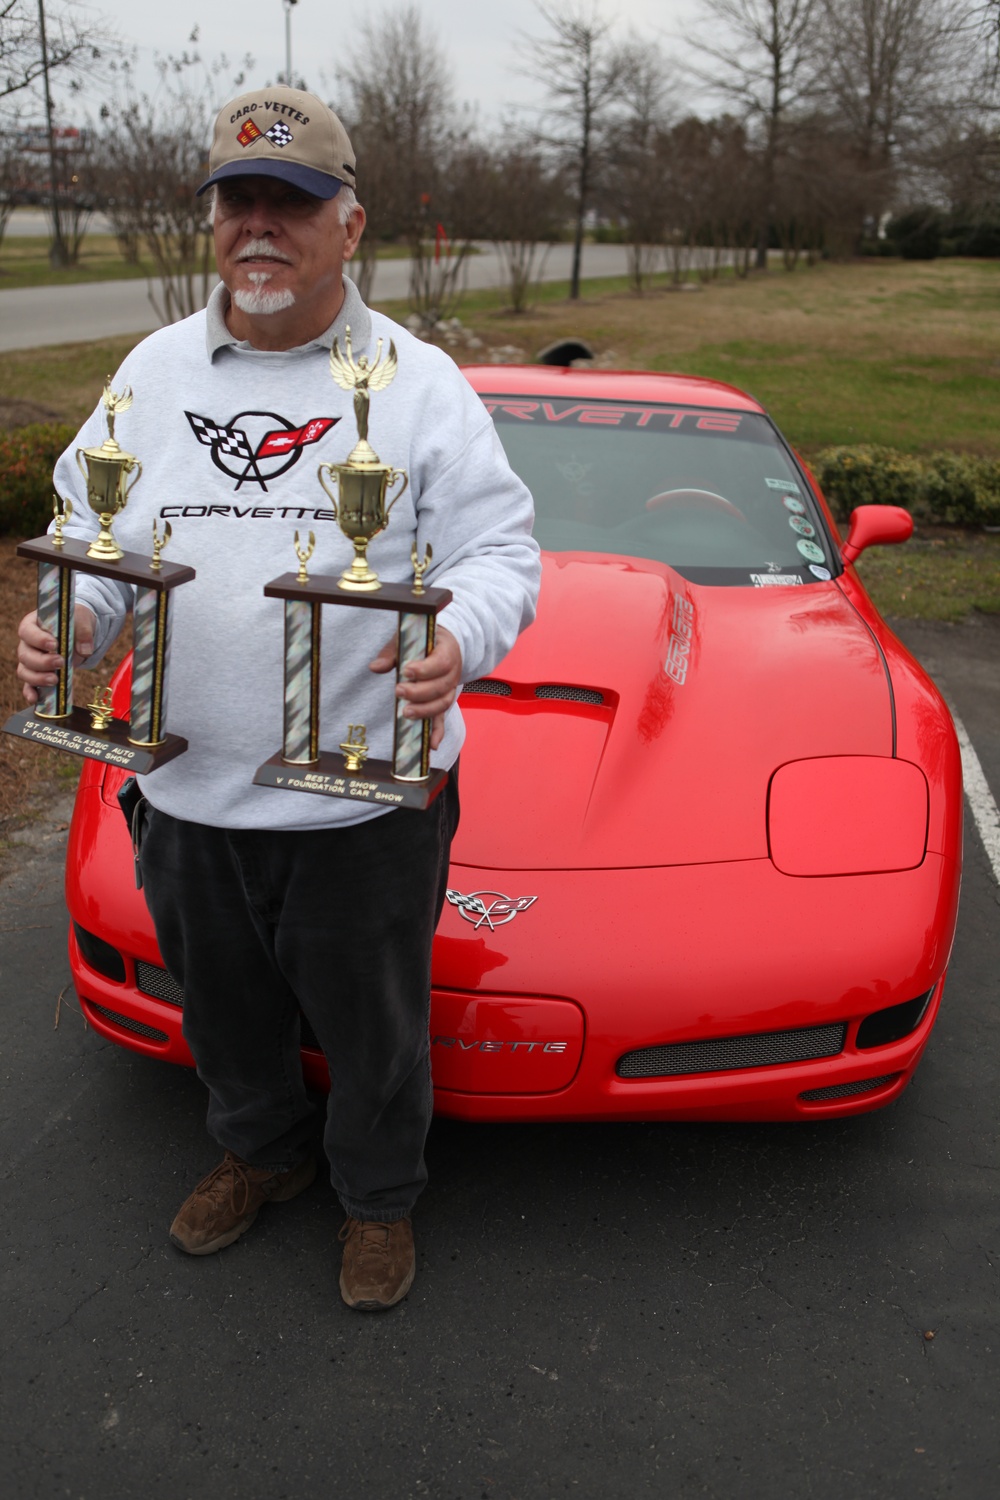 Marines, local restaurant support cancer research with car show